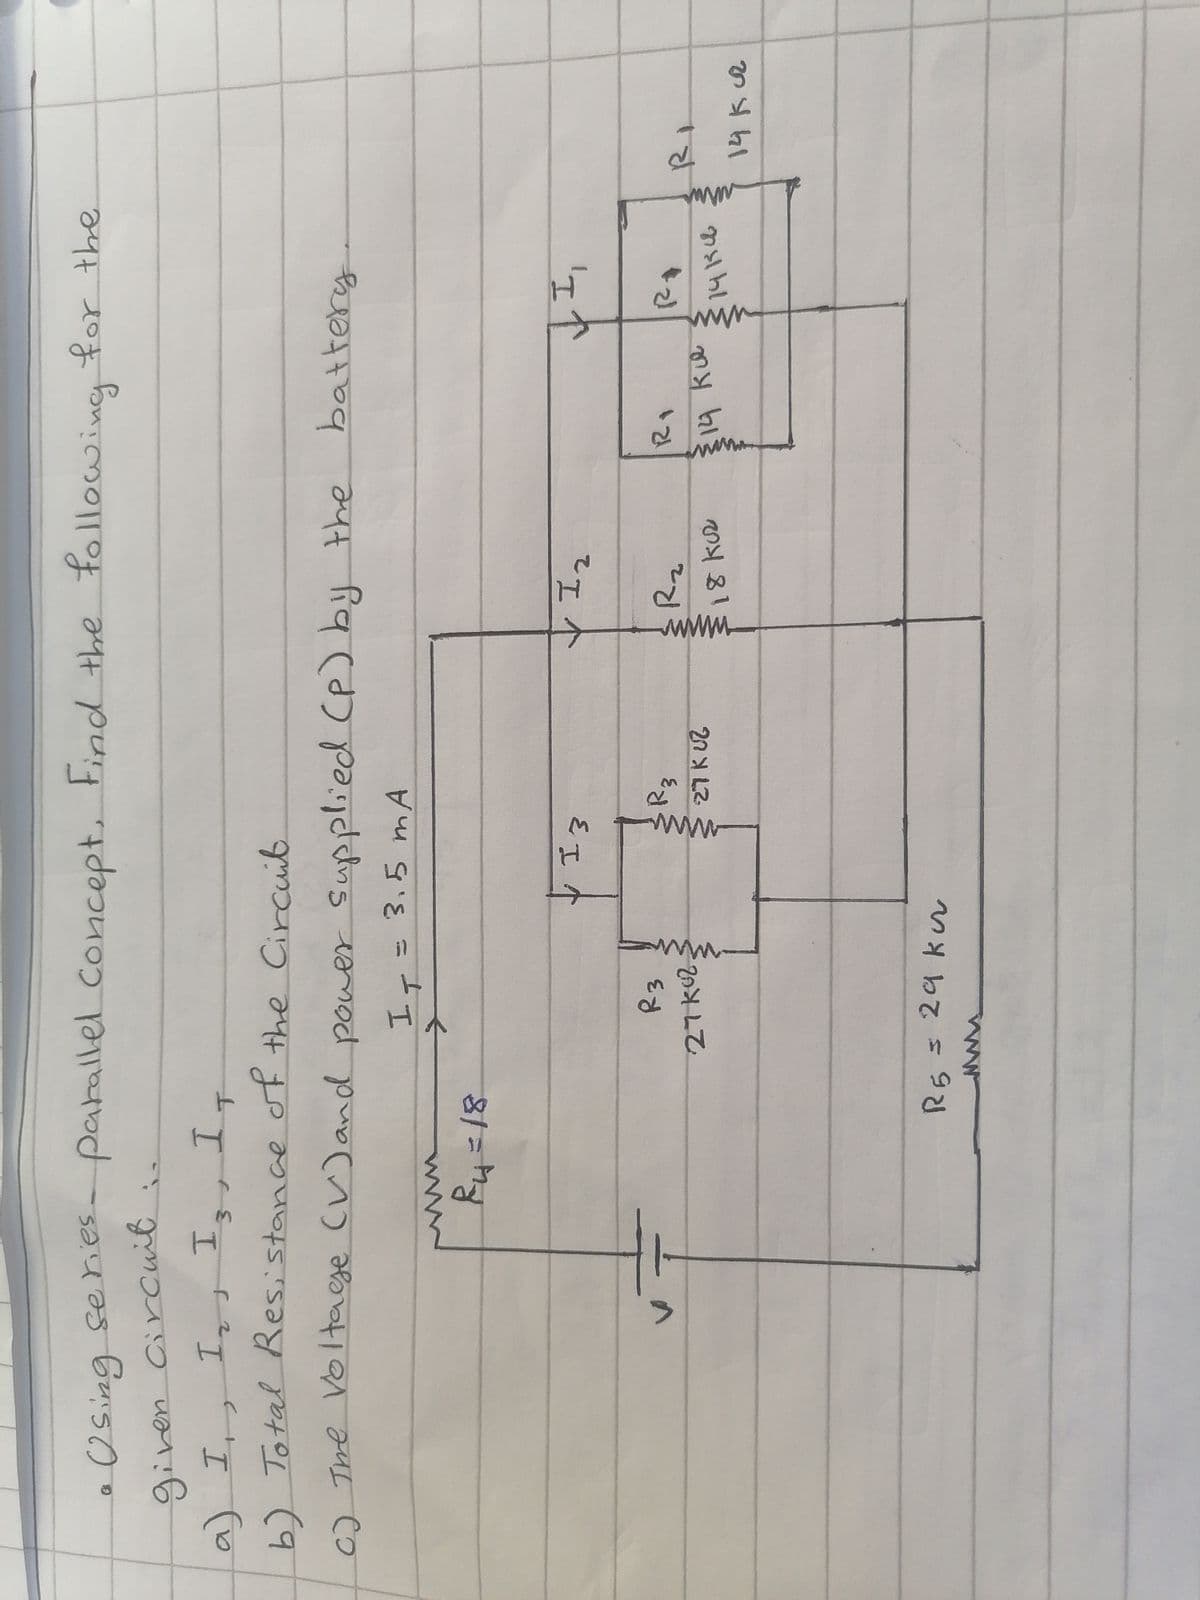 Using series- parallel concept. Find the following for the
given circuit
a) I, I₂, I3, IT
b) Total Resistance of the Circuit
c) The Voltage (V) and power supplied (P) by the
I₁ = 3.5 mA
ww
²4=18
R5
R3
27k02
29 kur
www
, 13
W
R3
27 KUZ
✓ I ₂
R₂
18 kuz
battery
RI
$14 ku
↓I₁
RE
14134
14 kuz